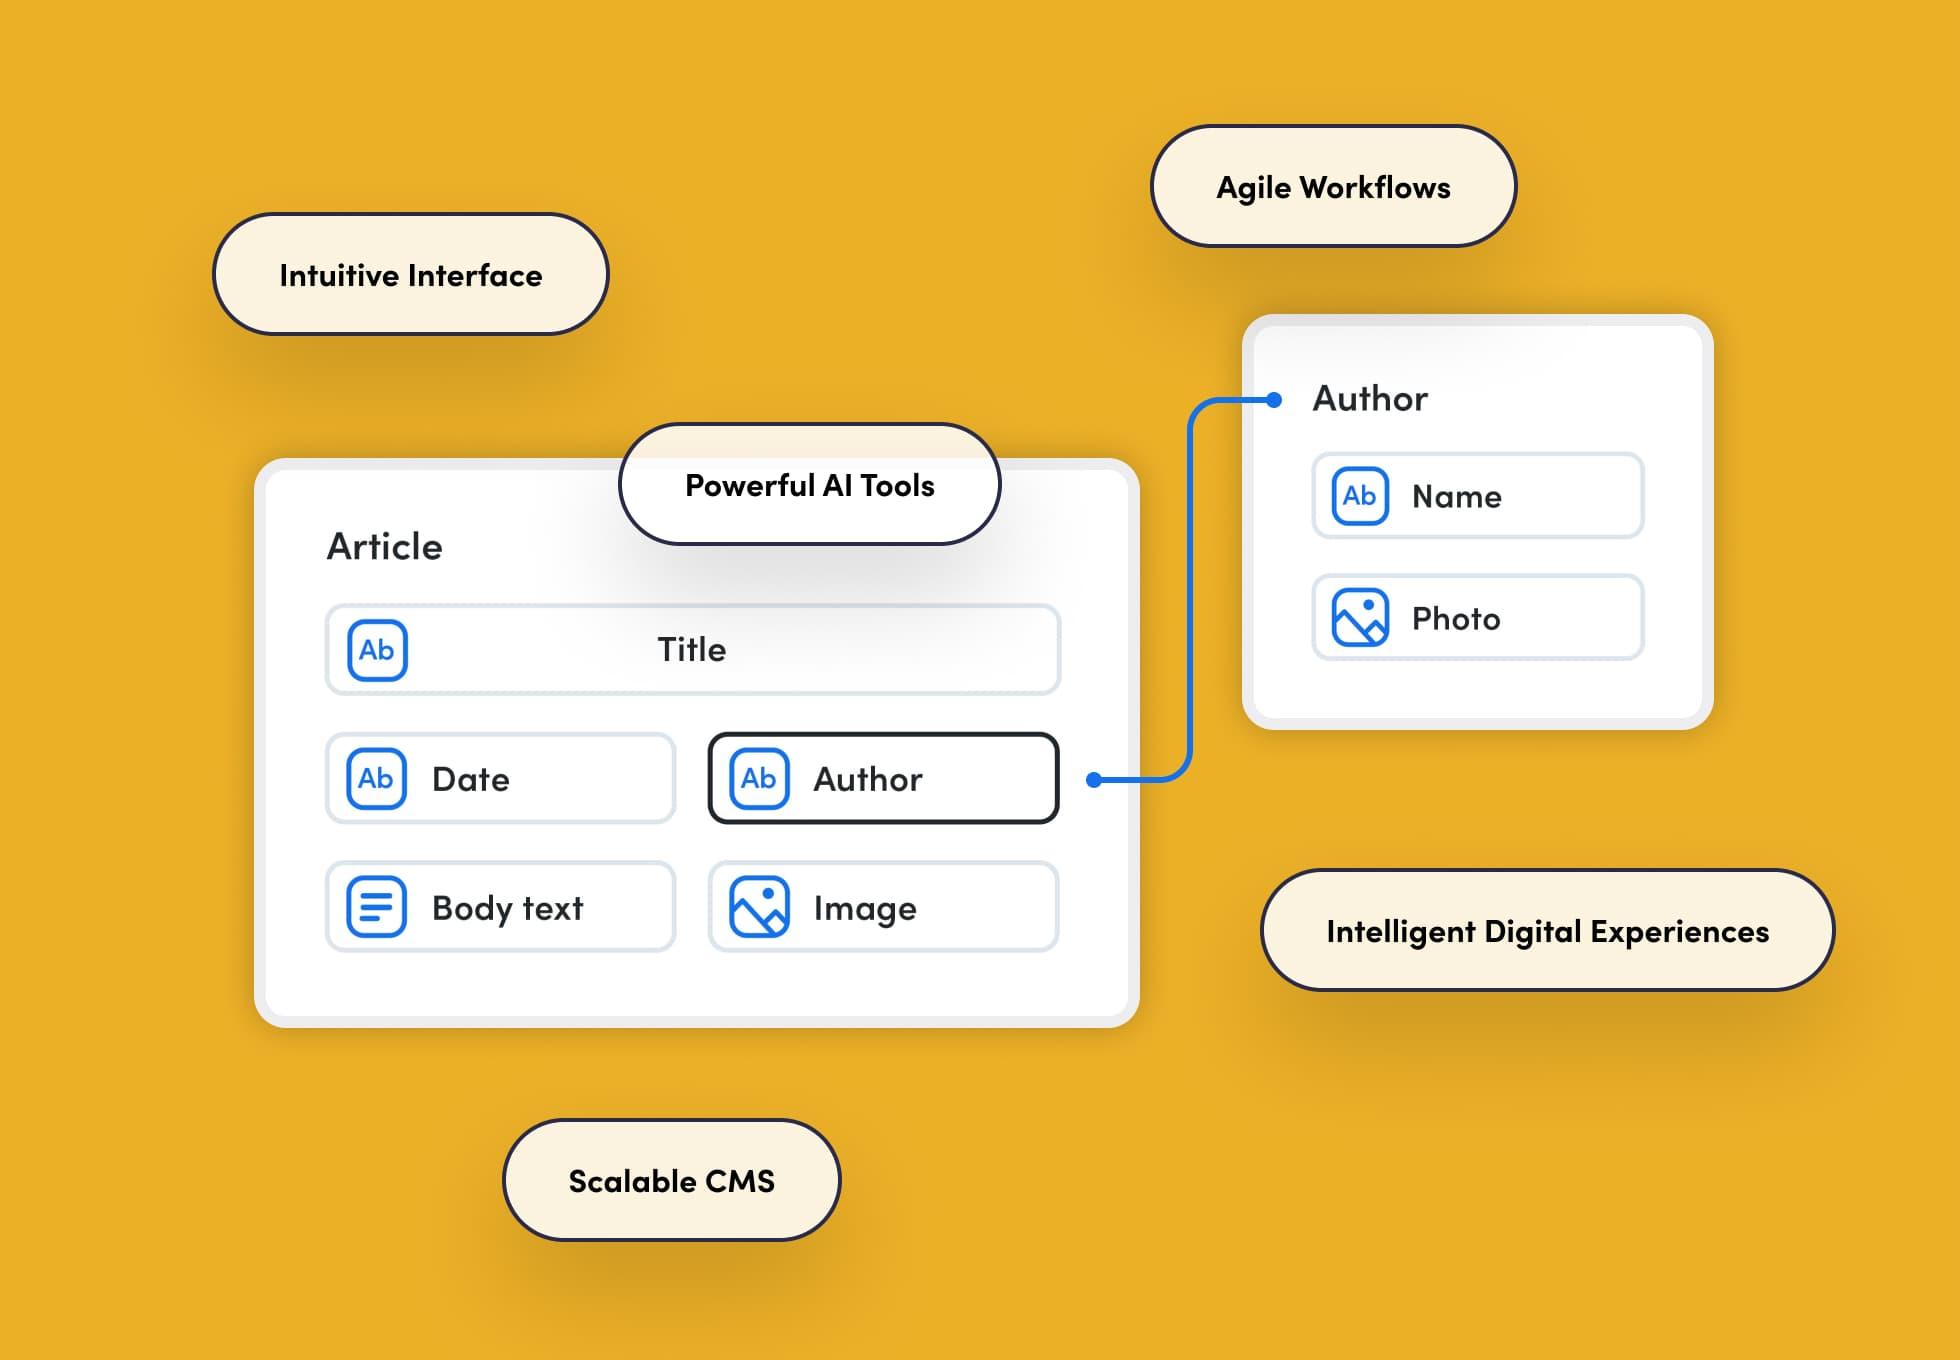 Screenshots of interface to organize content with Contentful. Around the screenshots are words in bubbles that say: Intuitive interface, powerful AI tools, agile workflows, scalable CMS, and intelligent digital experiences.